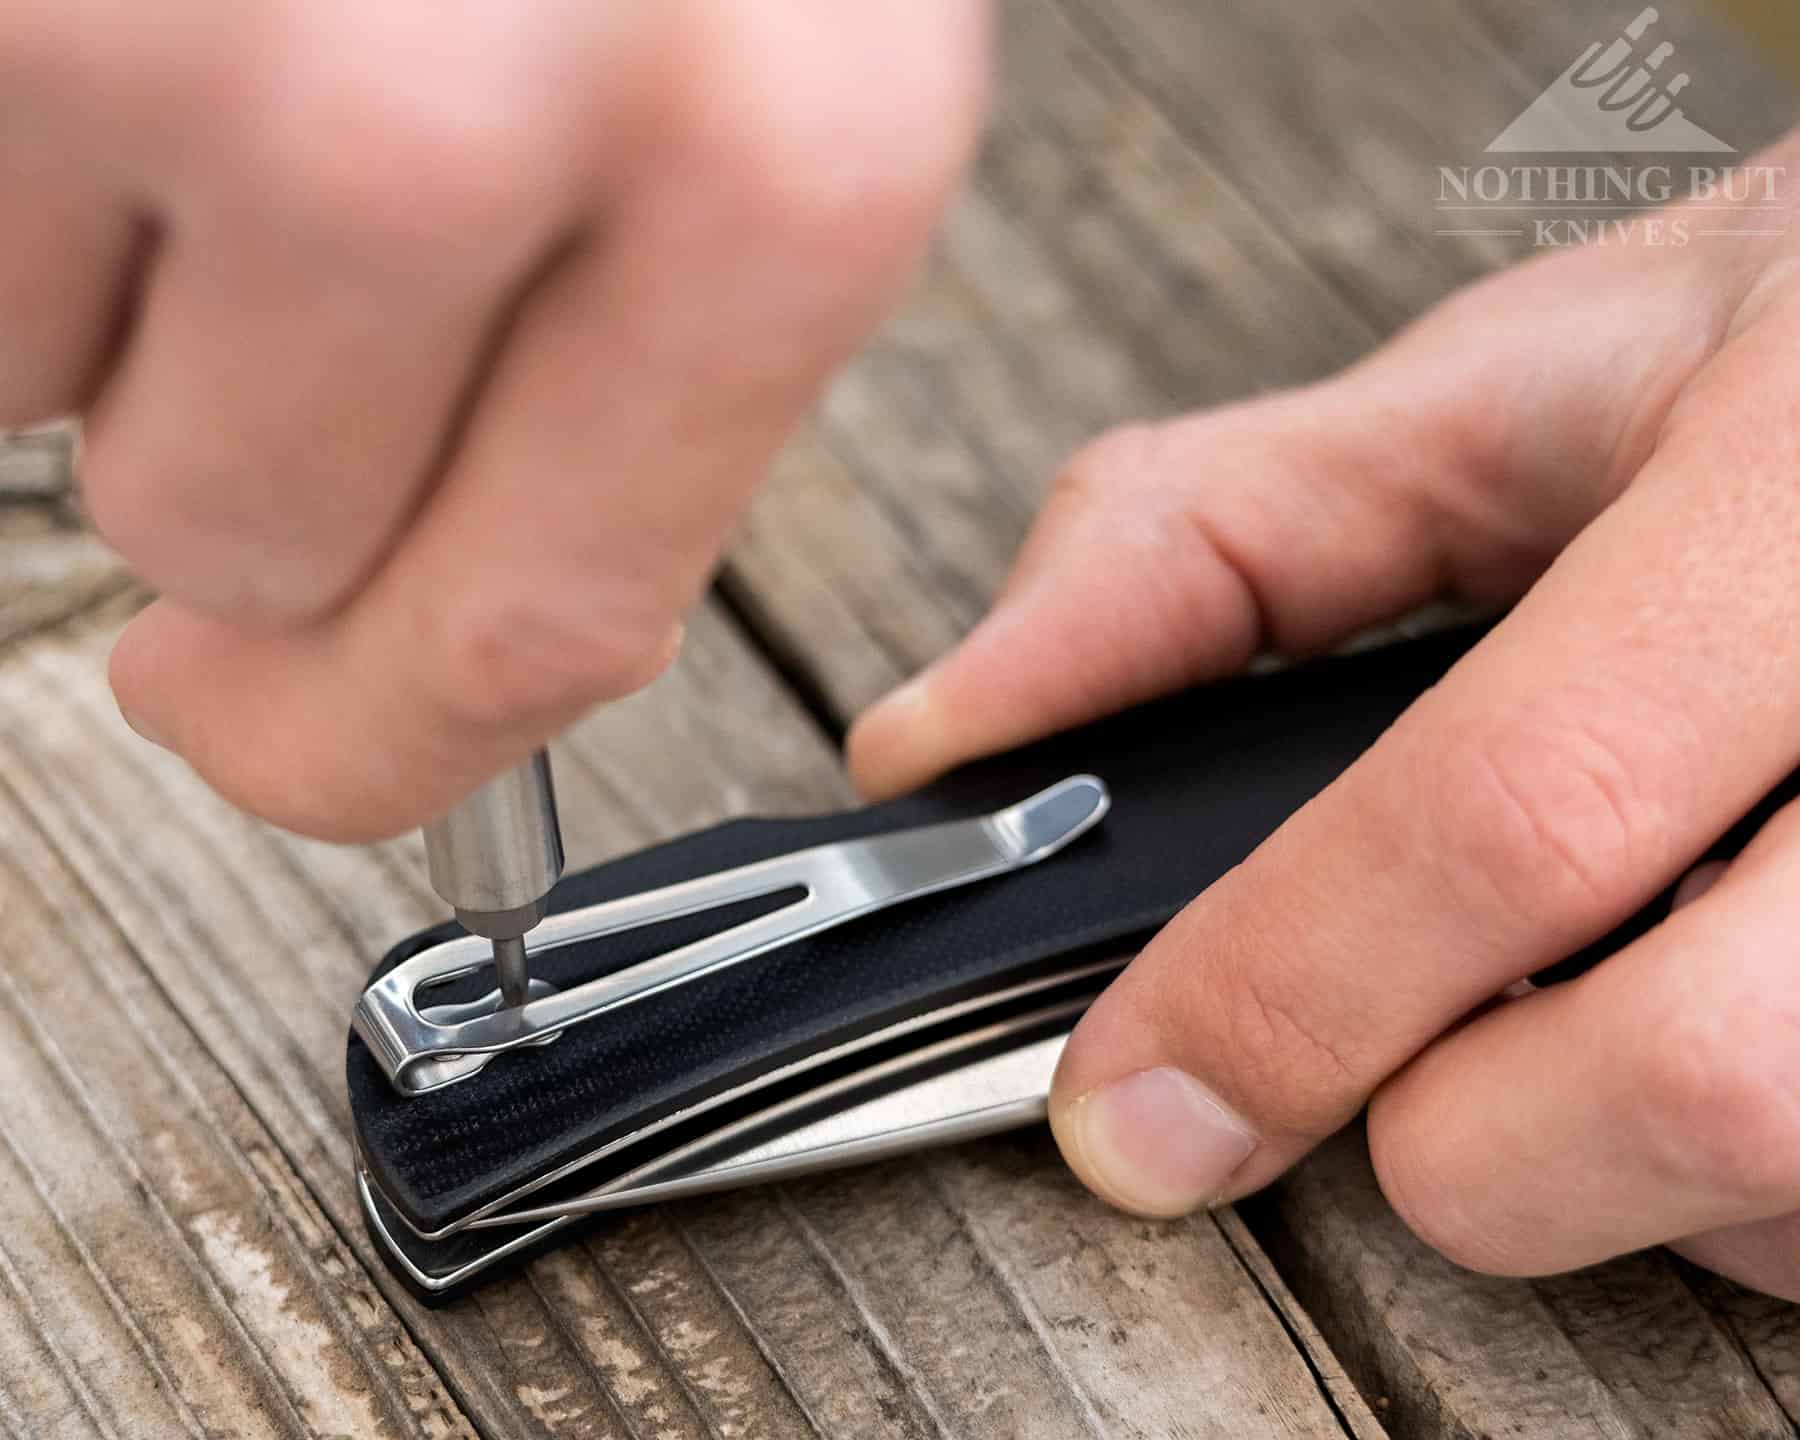 A close-up image that illustrates how to change the pocket clip from one side of the knife to the other.